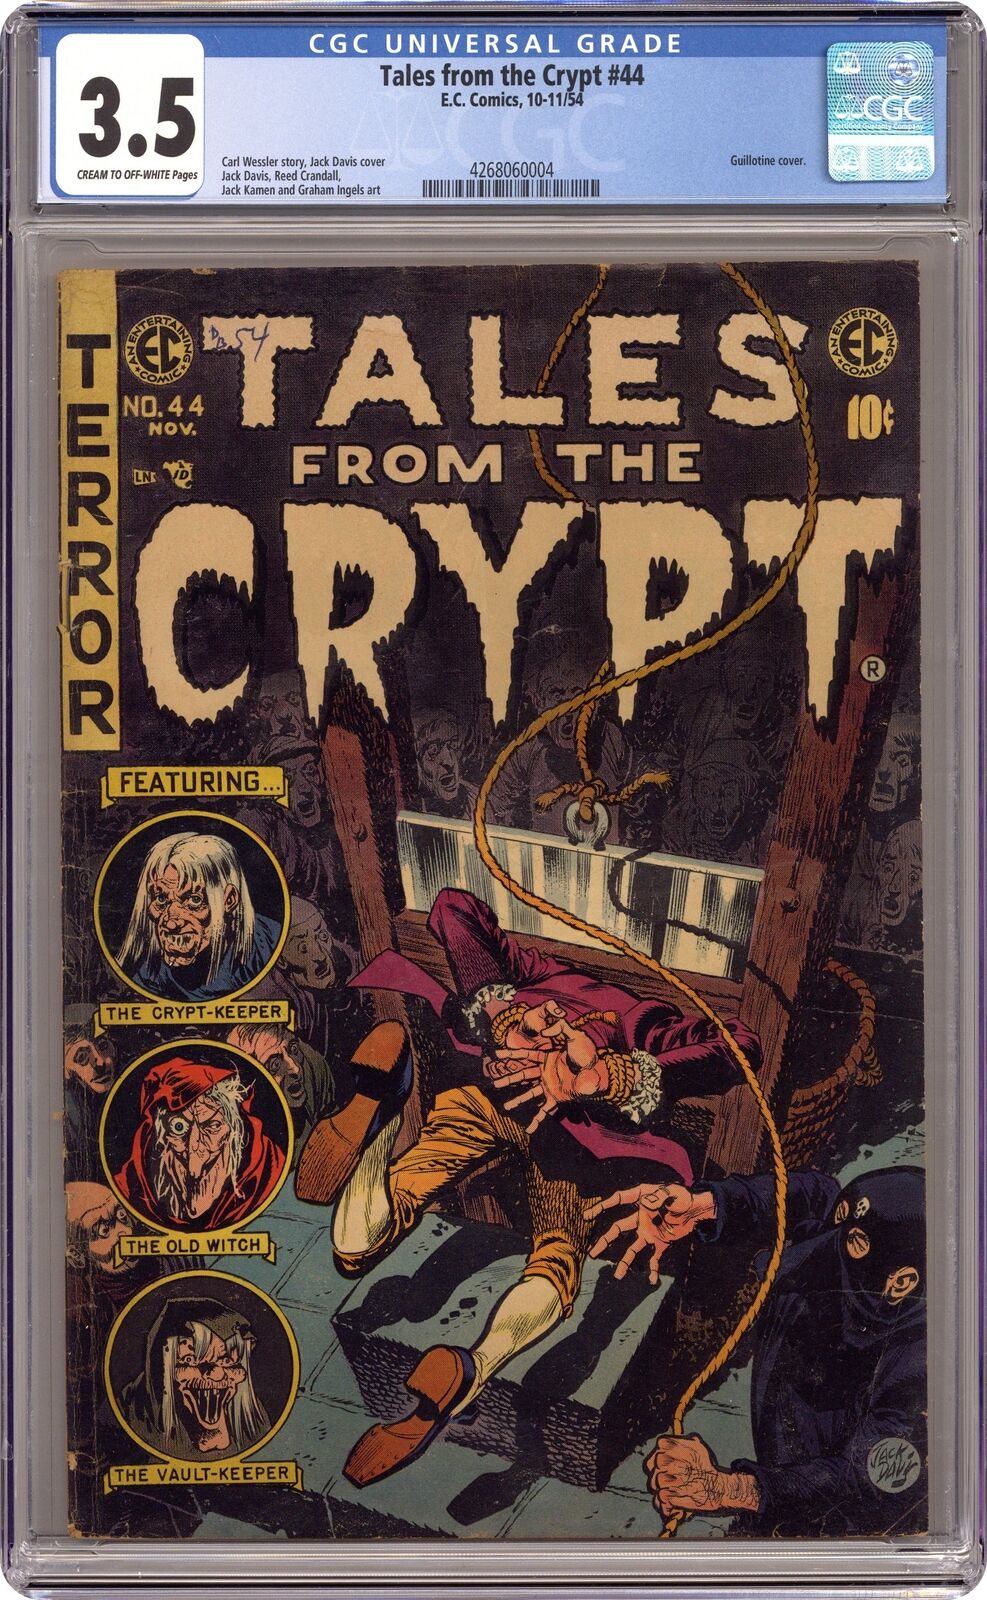 Tales from the Crypt #44 CGC 3.5 1954 4268060004